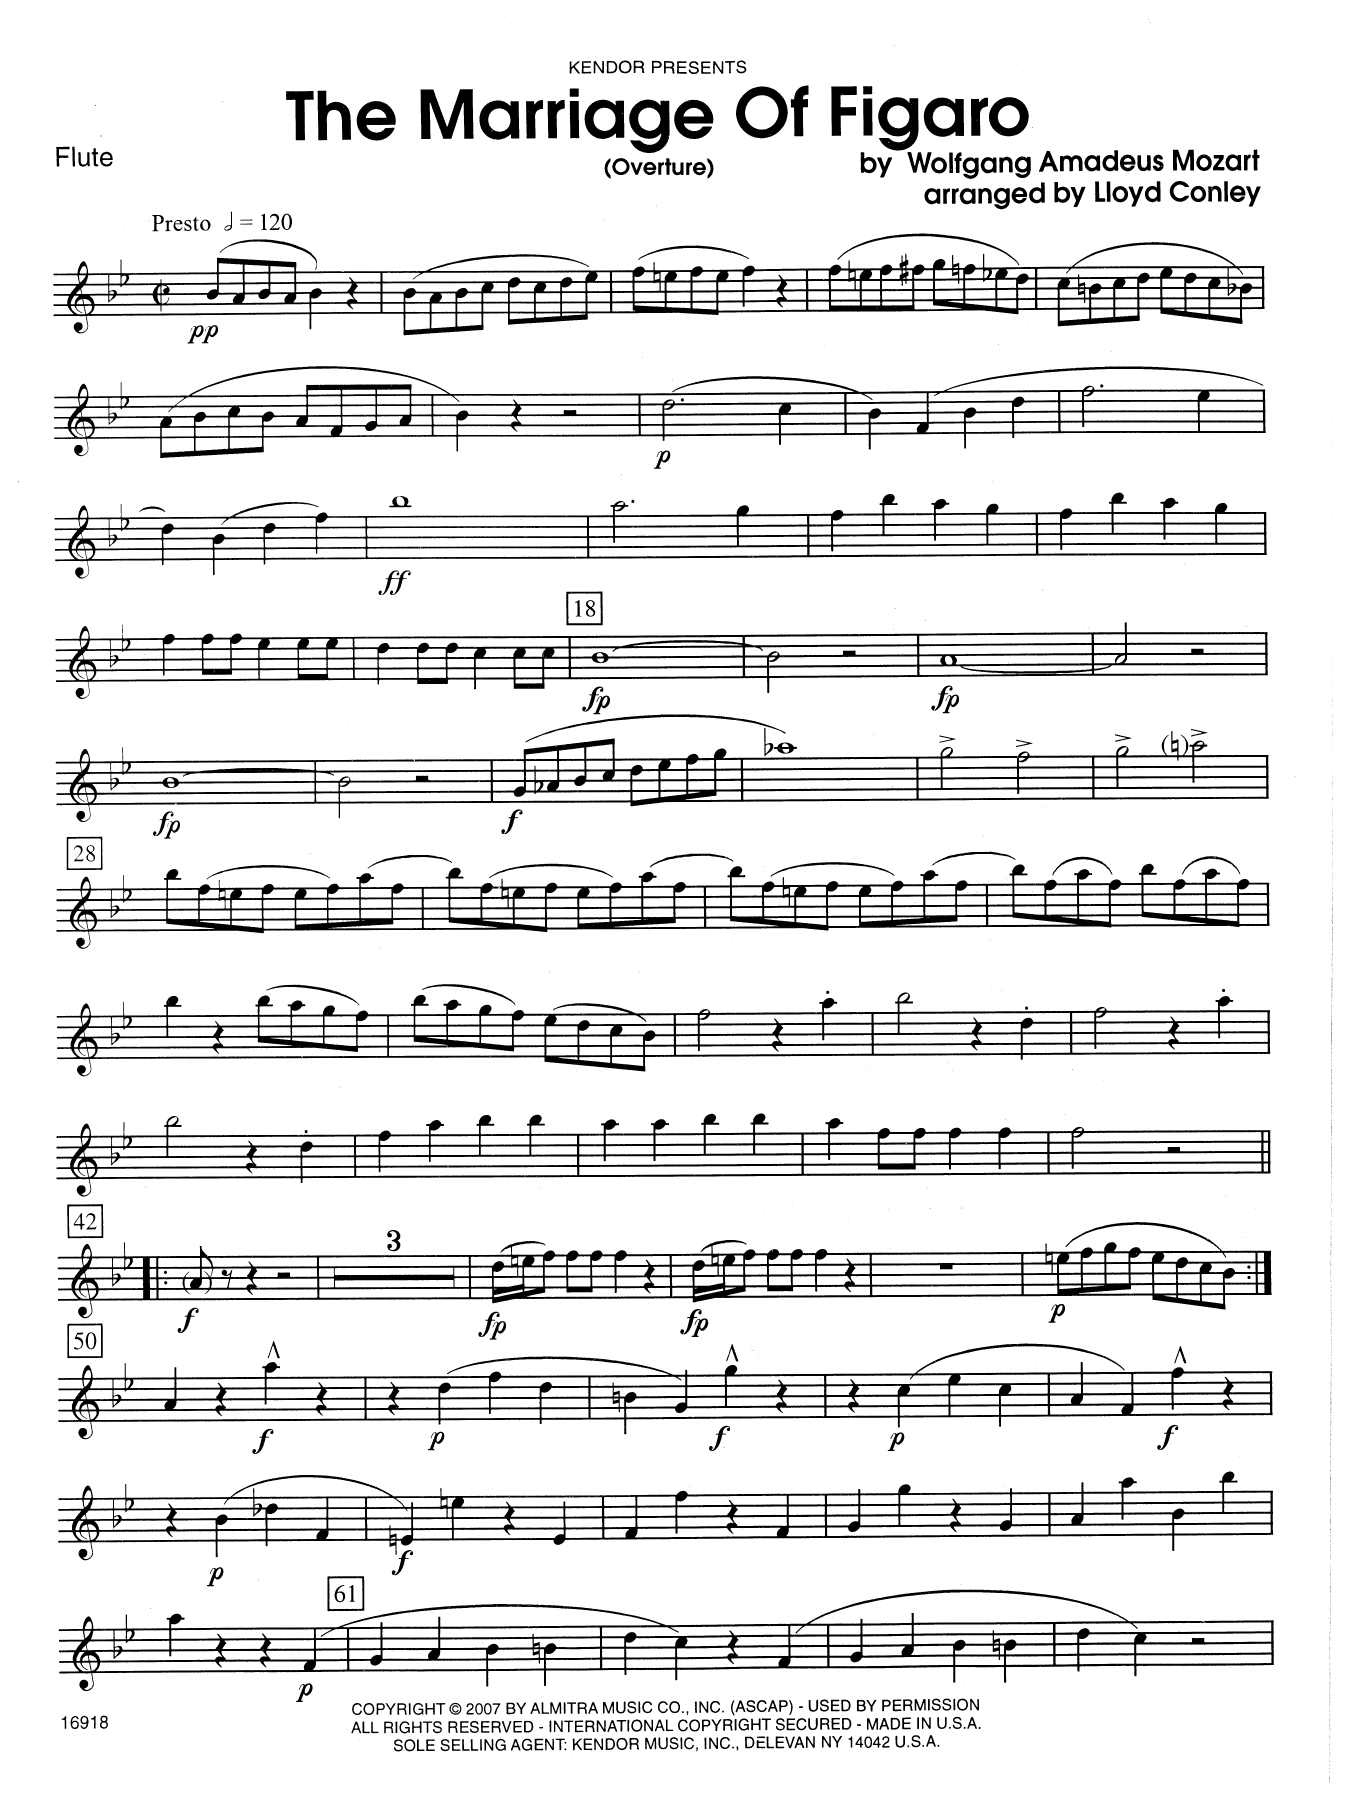 Download Lloyd Conley The Marriage Of Figaro (Overture) - Flu Sheet Music